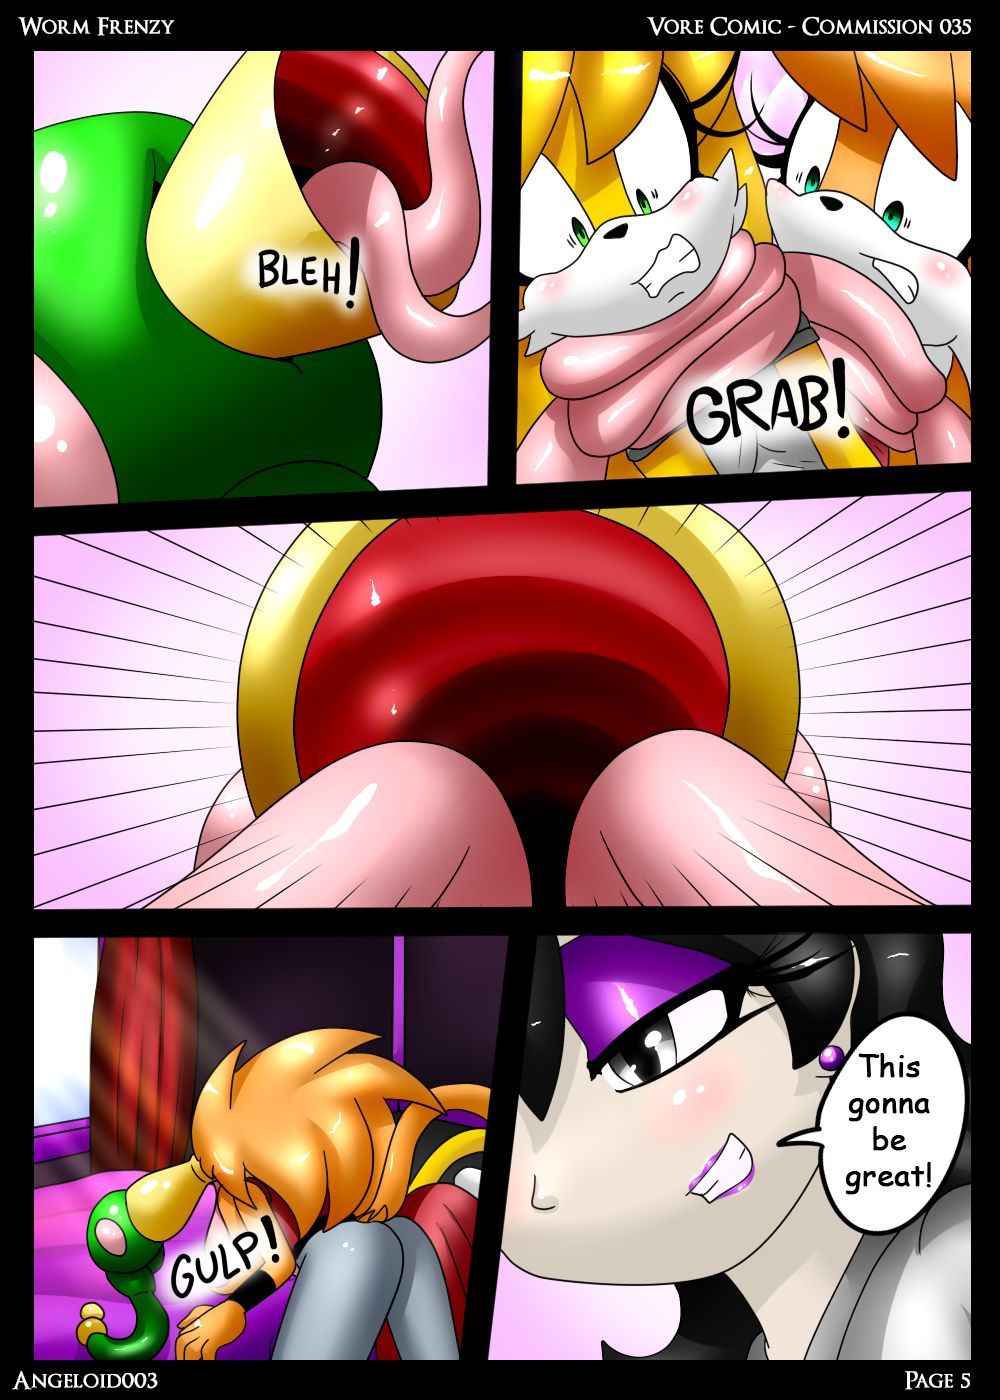 Worm Frenzy - Angeloid003 page 5